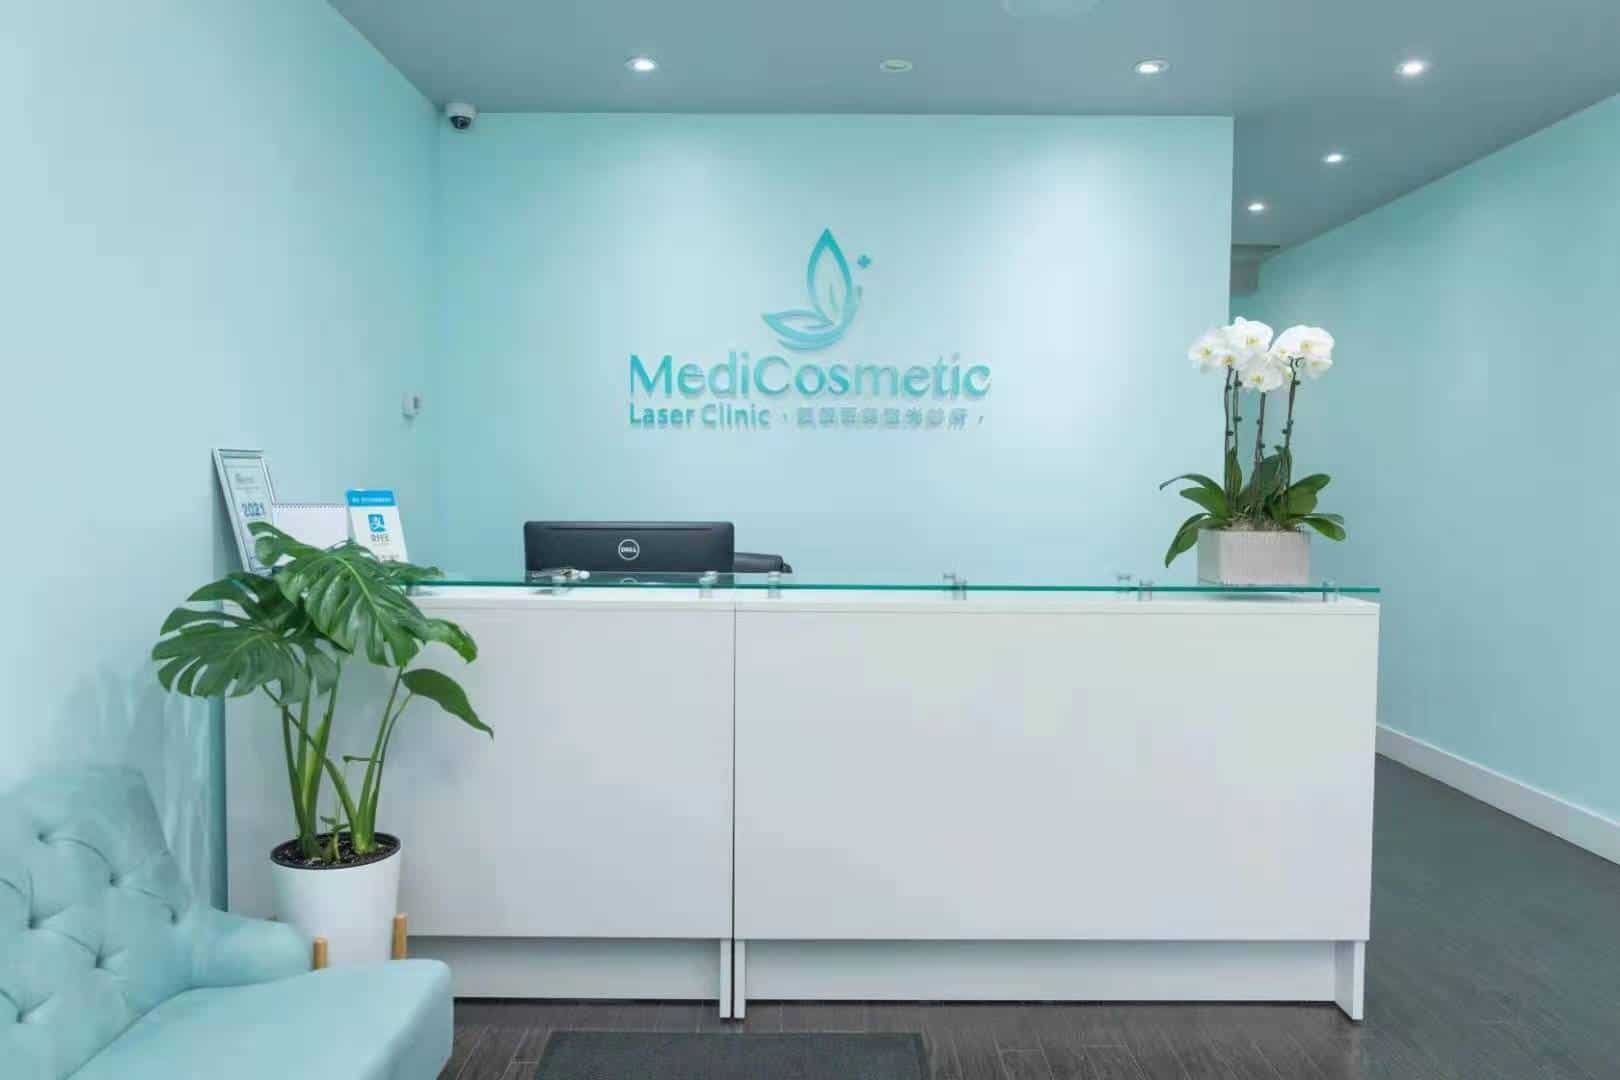 About MediCosmetic